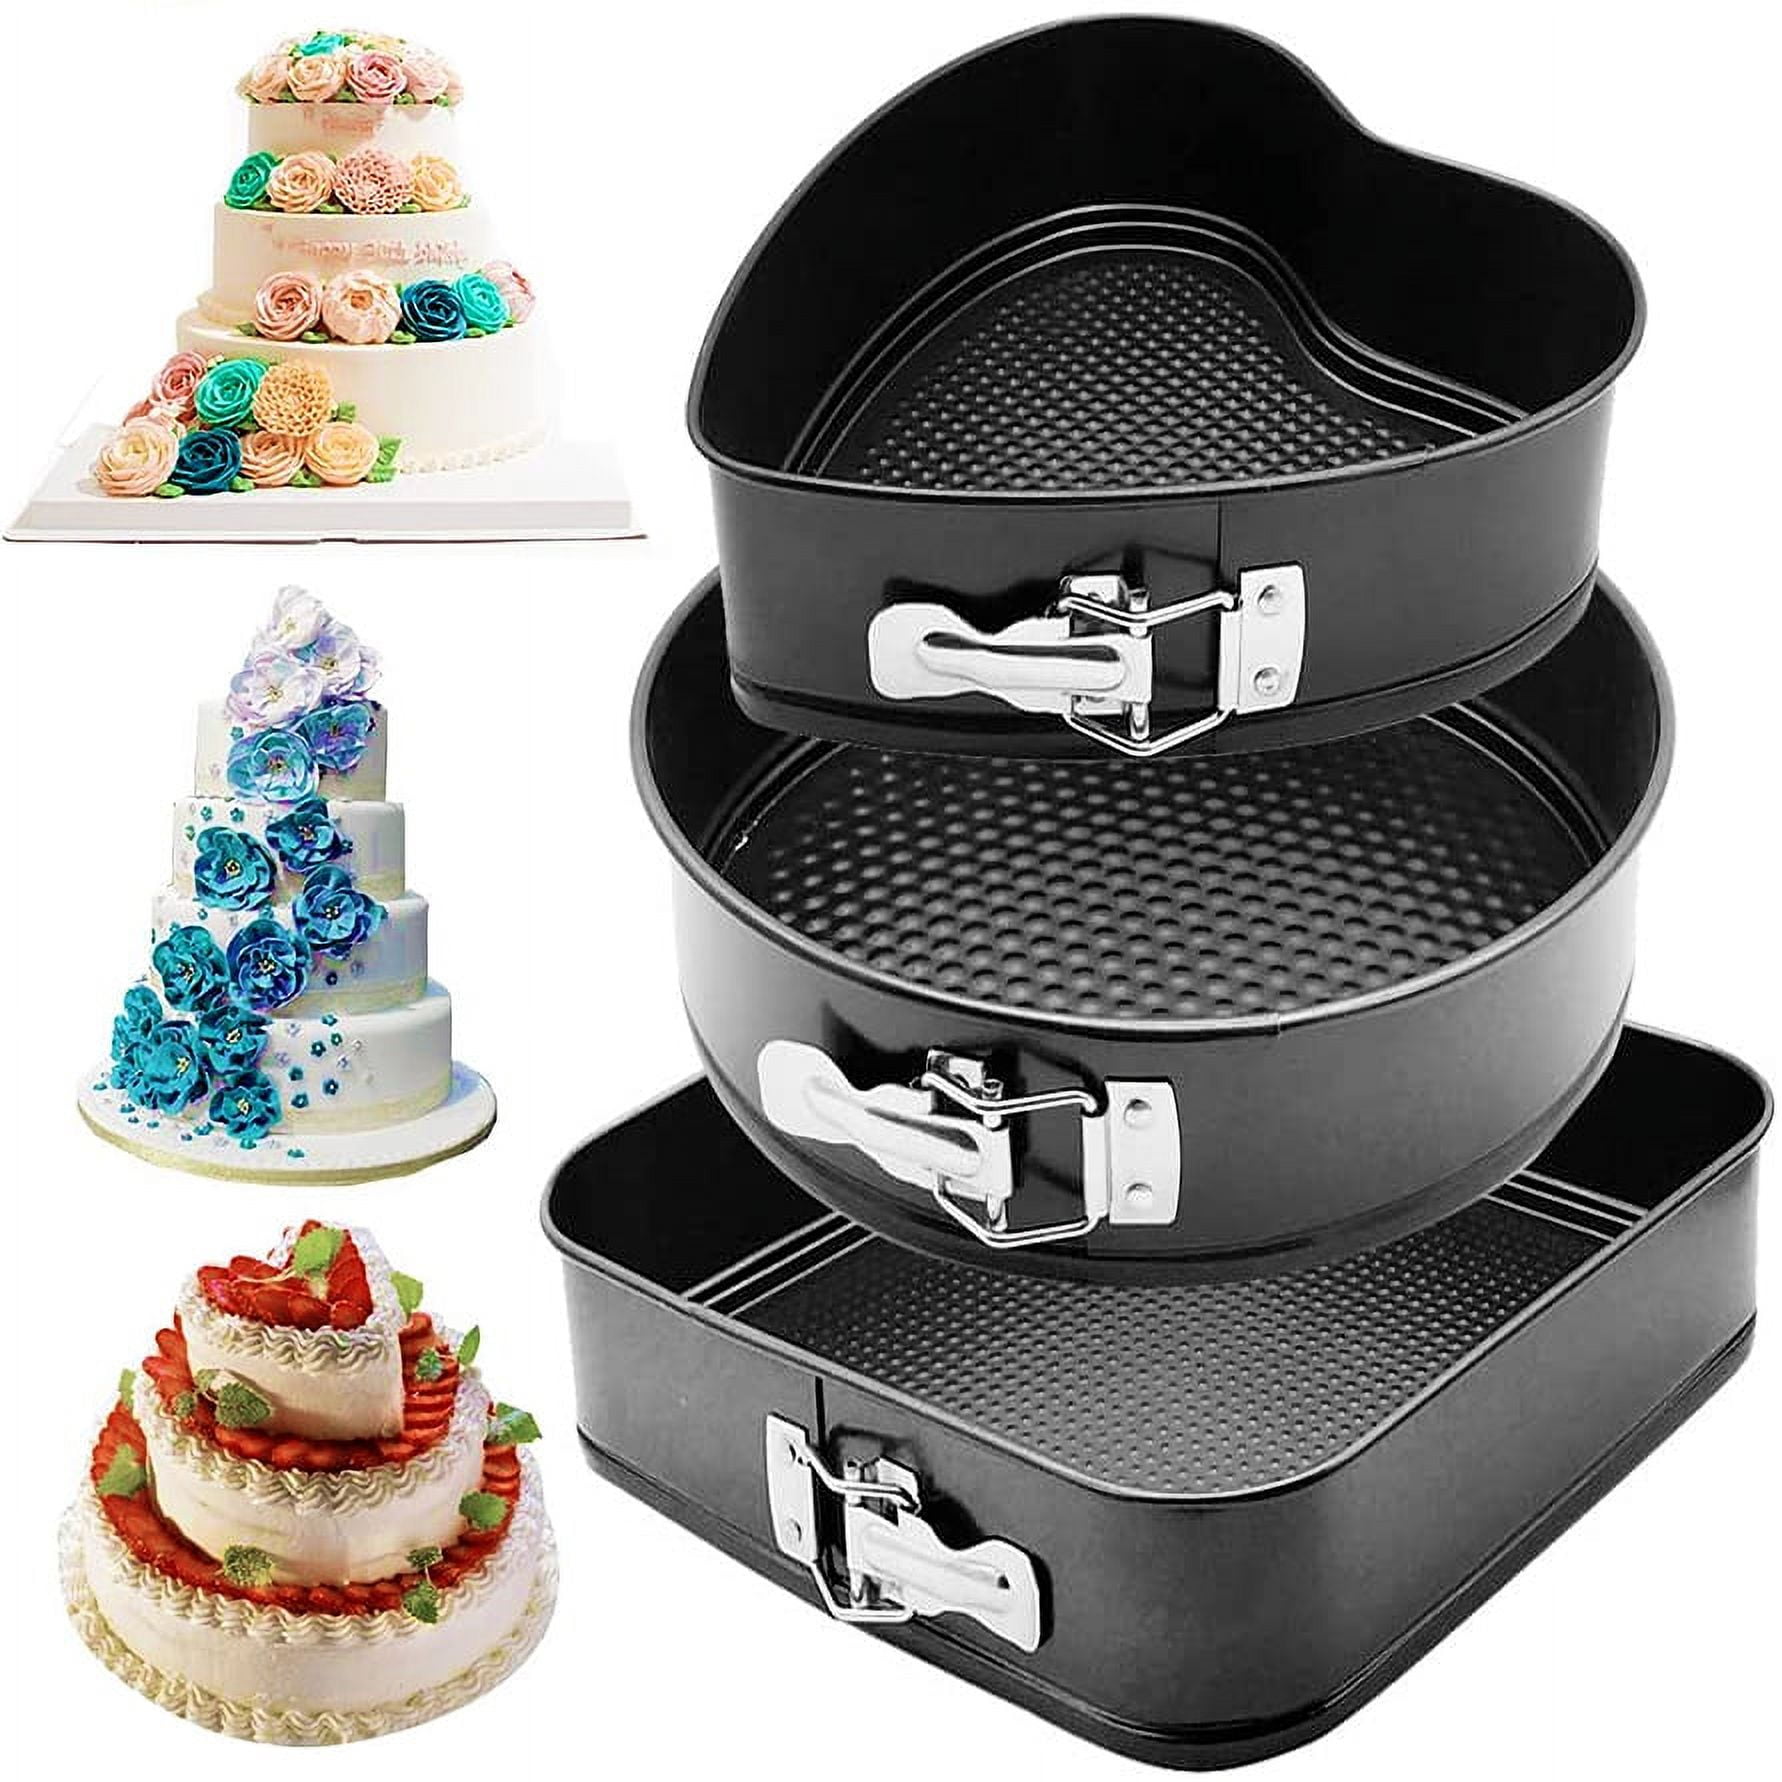 4/7/8/9/10/11/12 inch Round Carbon Steel Non-stick Springform Cake Pan  Bakeware Party Cheesecake Mold Pan Kitchen Baking Moulds